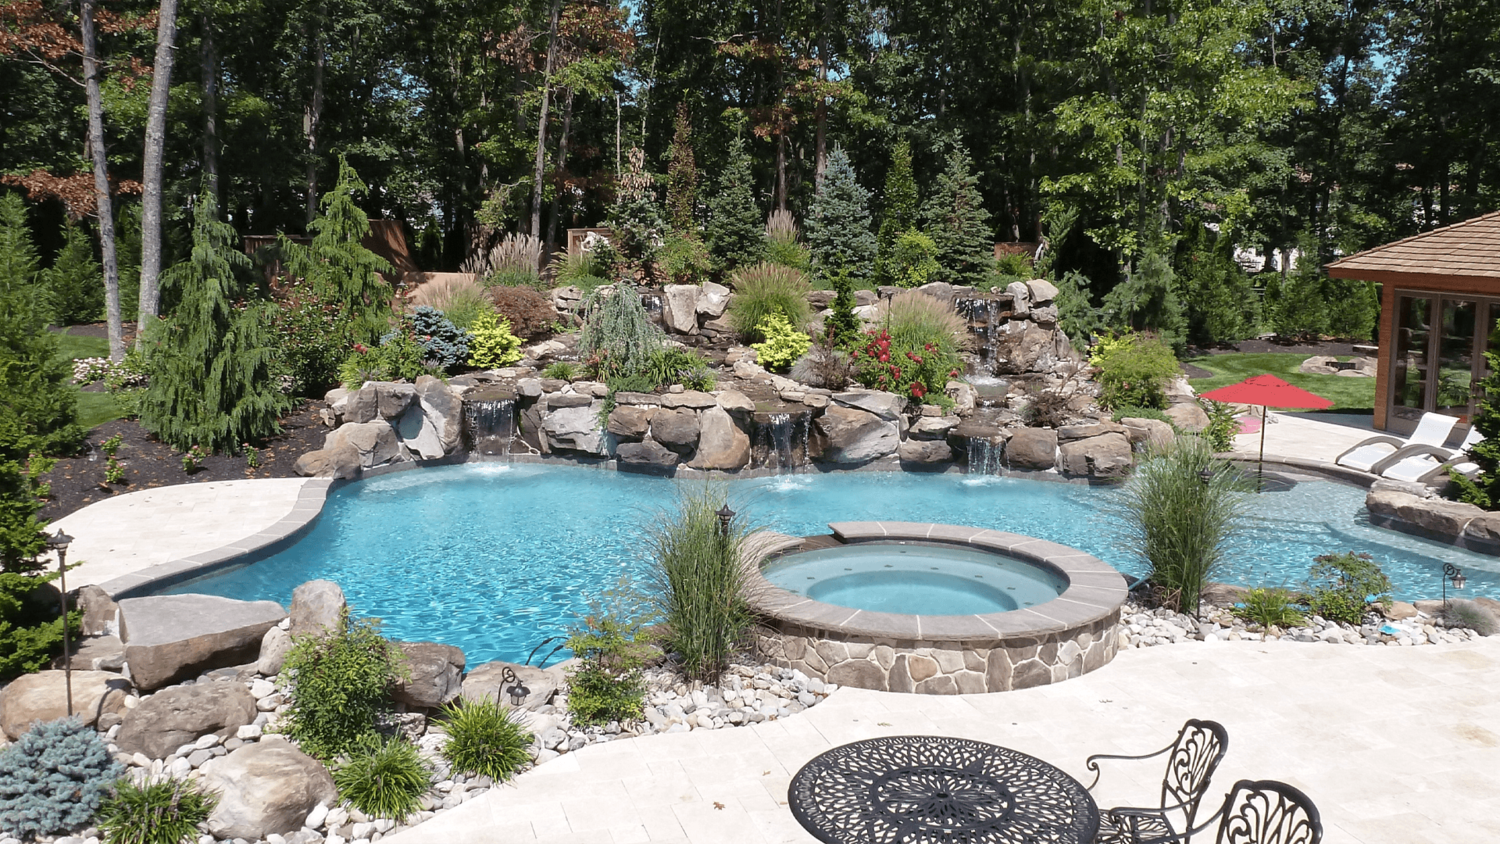 Dibiase Landscaping, Landscaping Companies In South Jersey